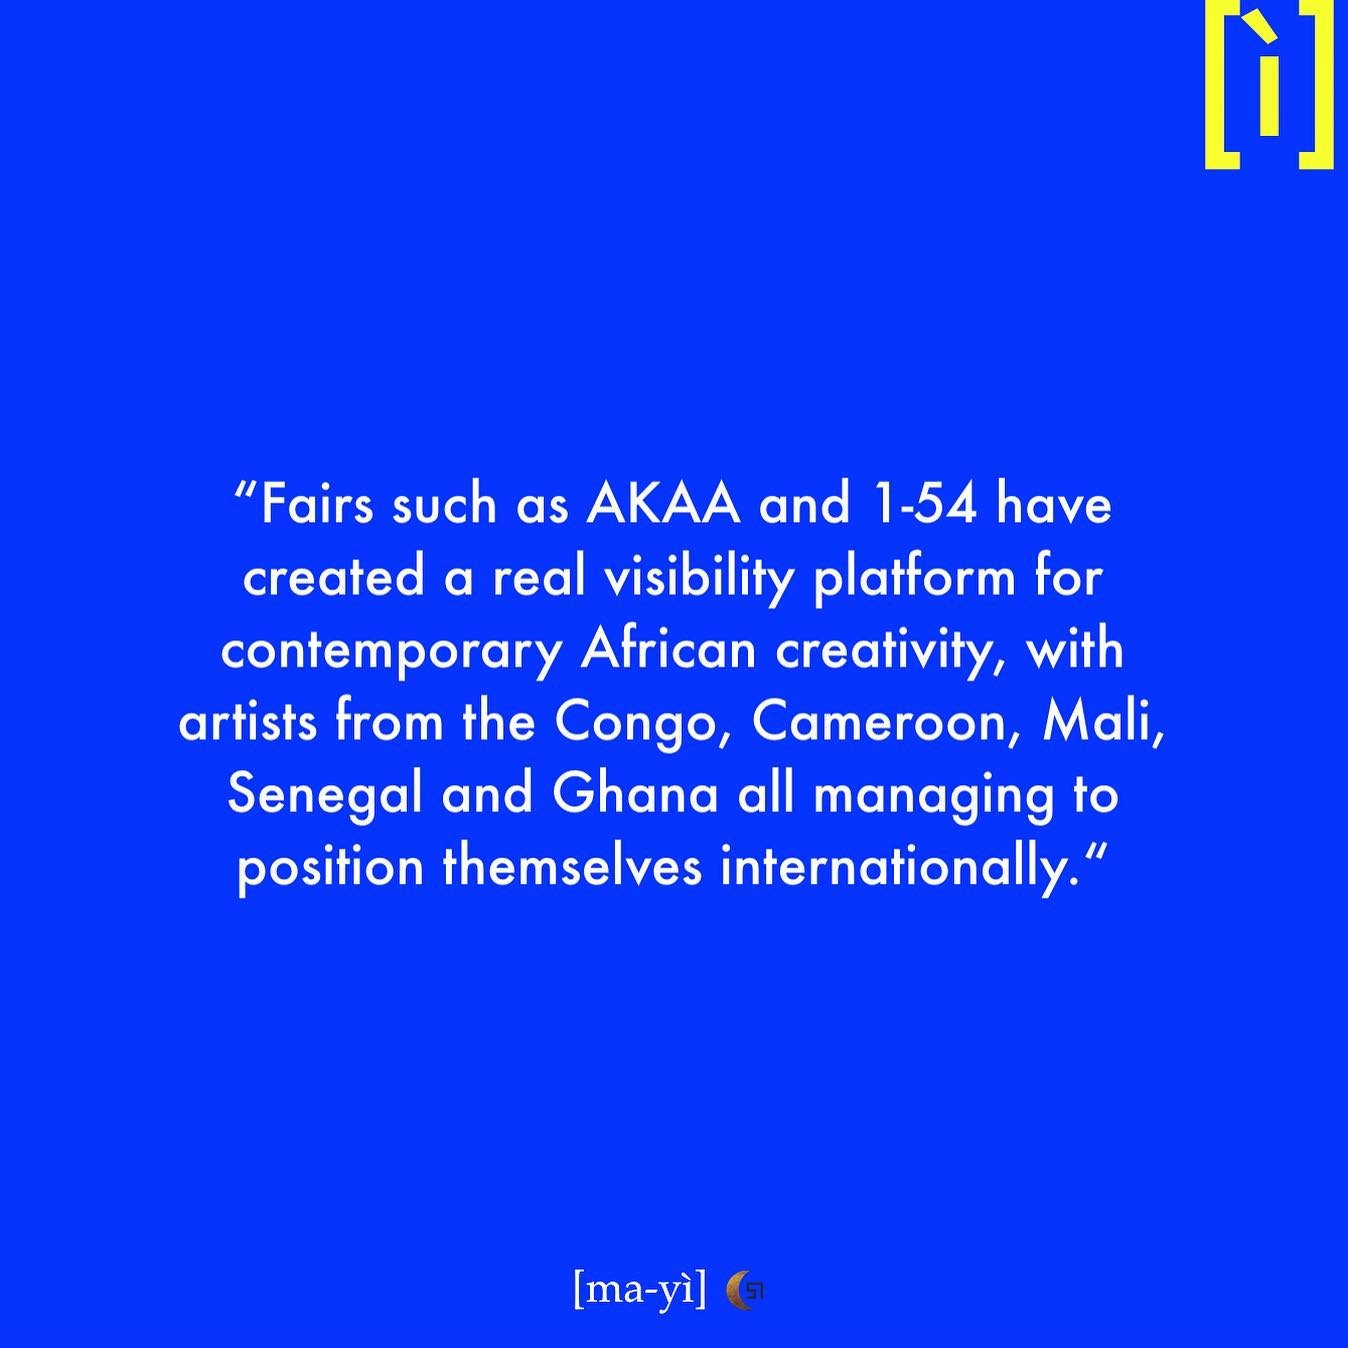 [REWIND] ✨While artists from the African continent and its diasporas are taking over through fairs and global exhibitions, we can observe disparities across countries, with some expanding their influence at a slower pace. DR Congo is one of them. Yan